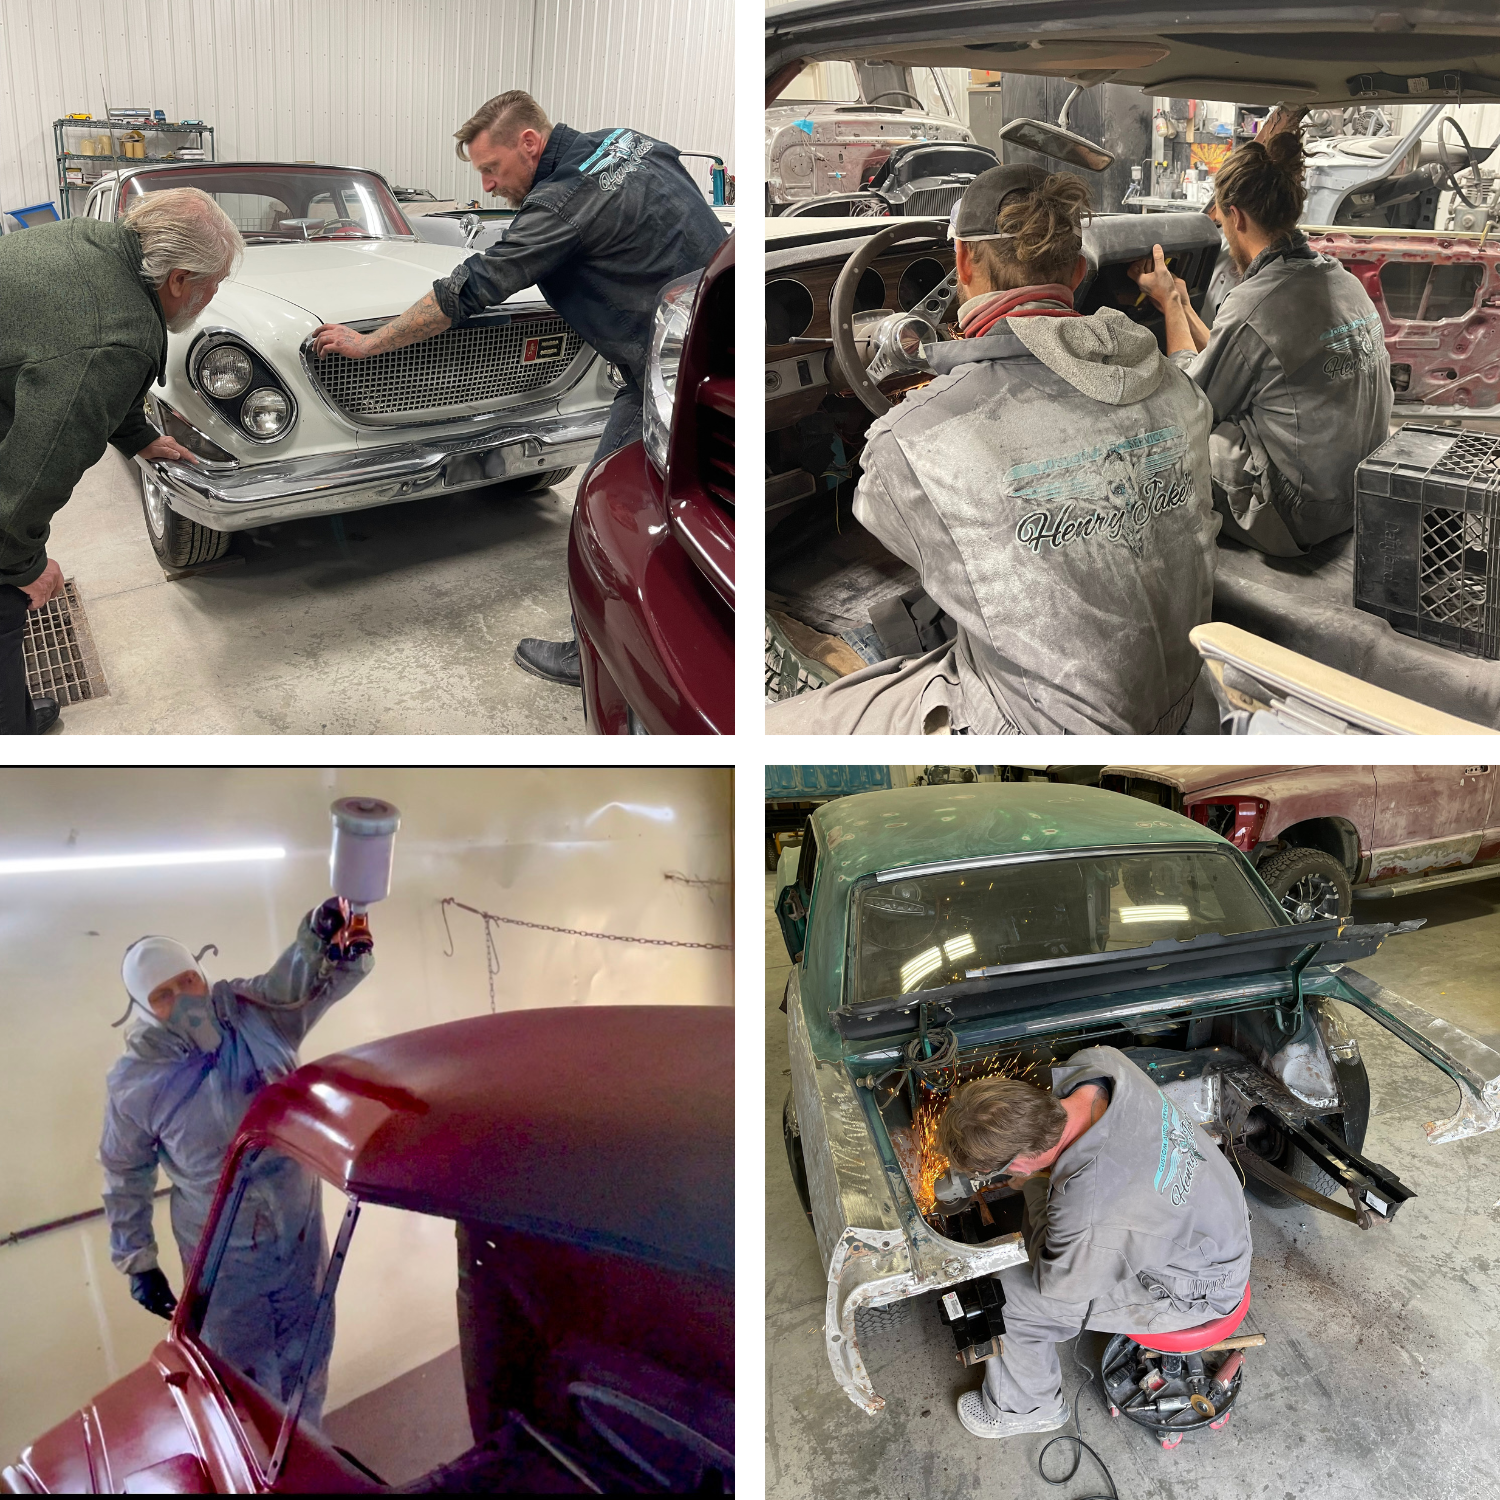 4 images of men working on cars